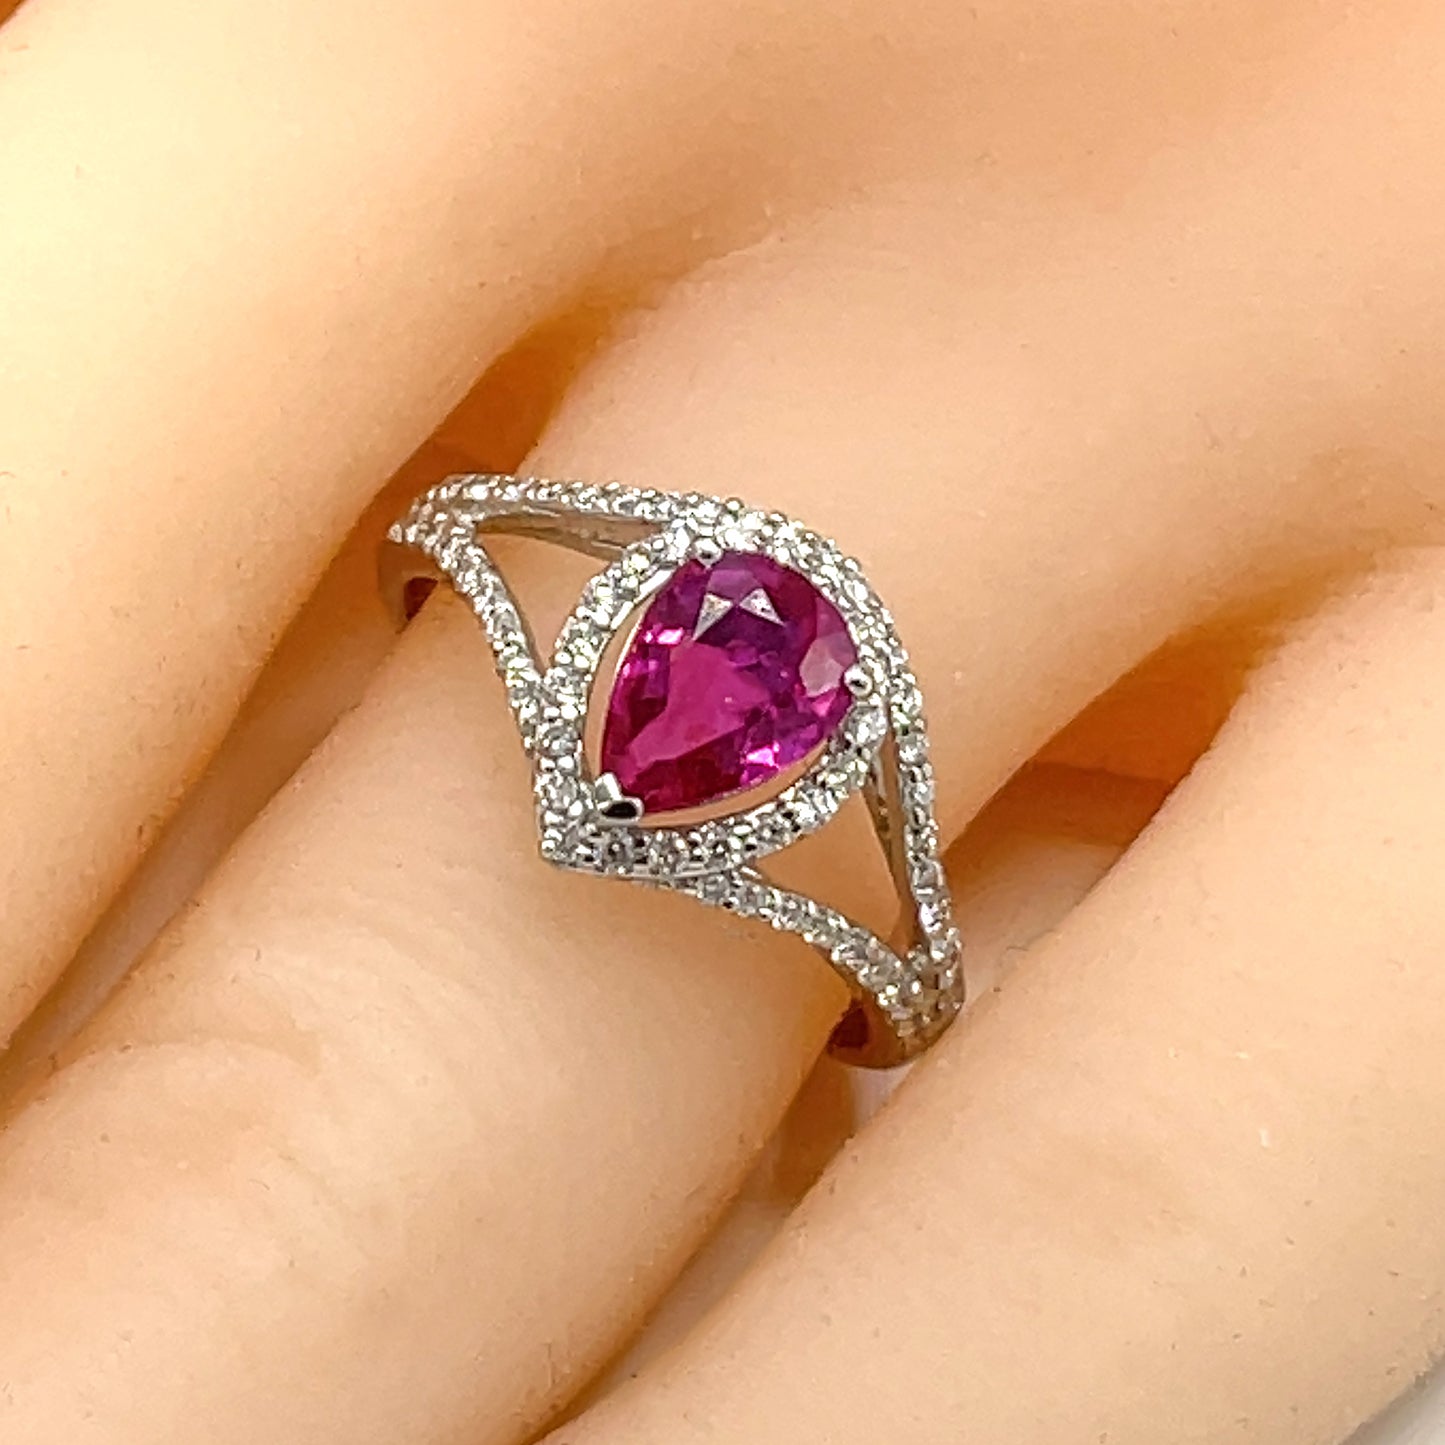 0.47 TW Pear Shape Ruby and Emerald Infinity Style Unique Wedding Band